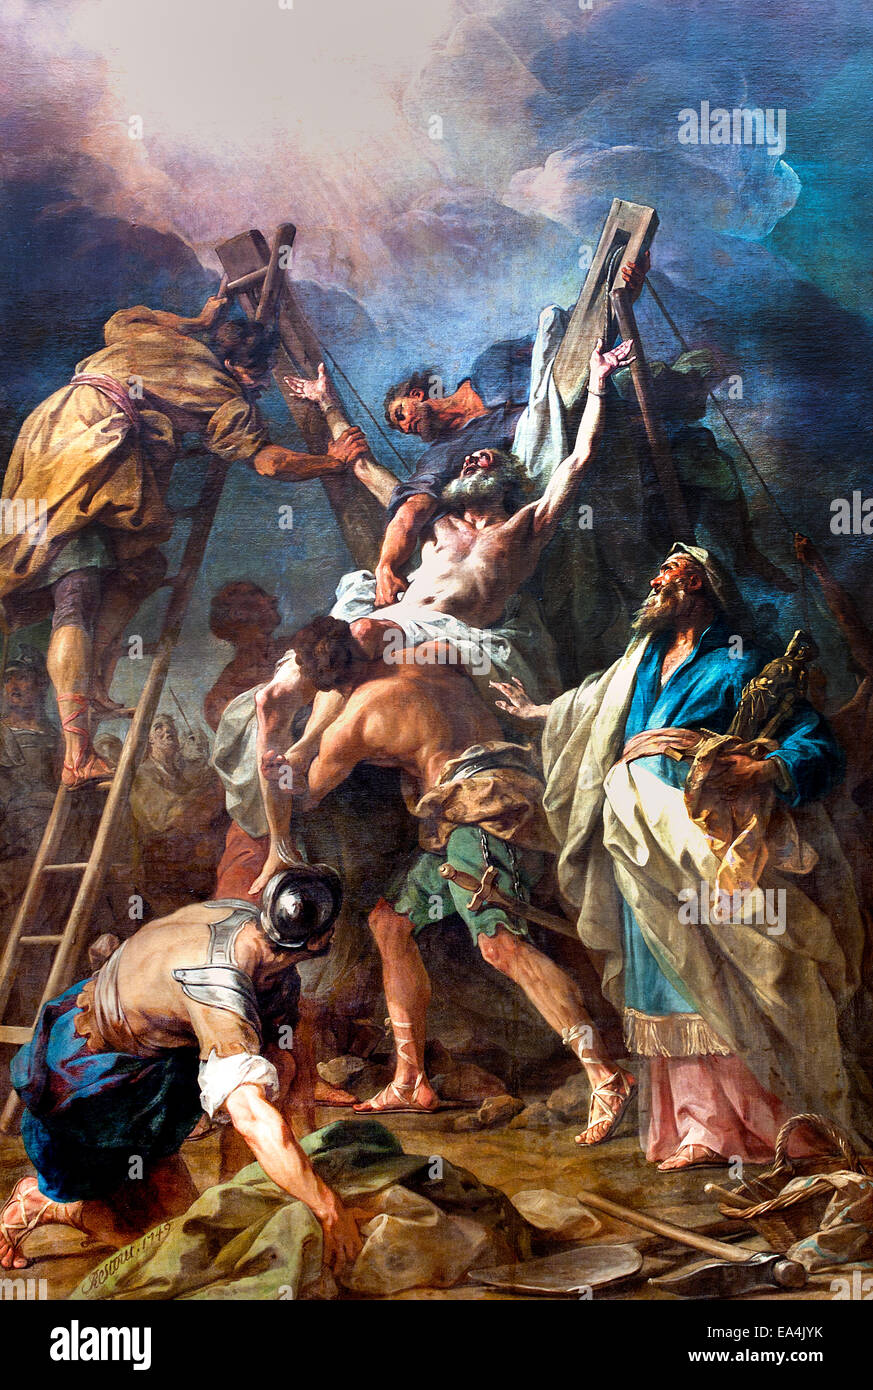 Le Martyre de Saint André - The Martyrdom of St. Andrew by Jean II Restout  1692 – 1768 French painter France Stock Photo - Alamy